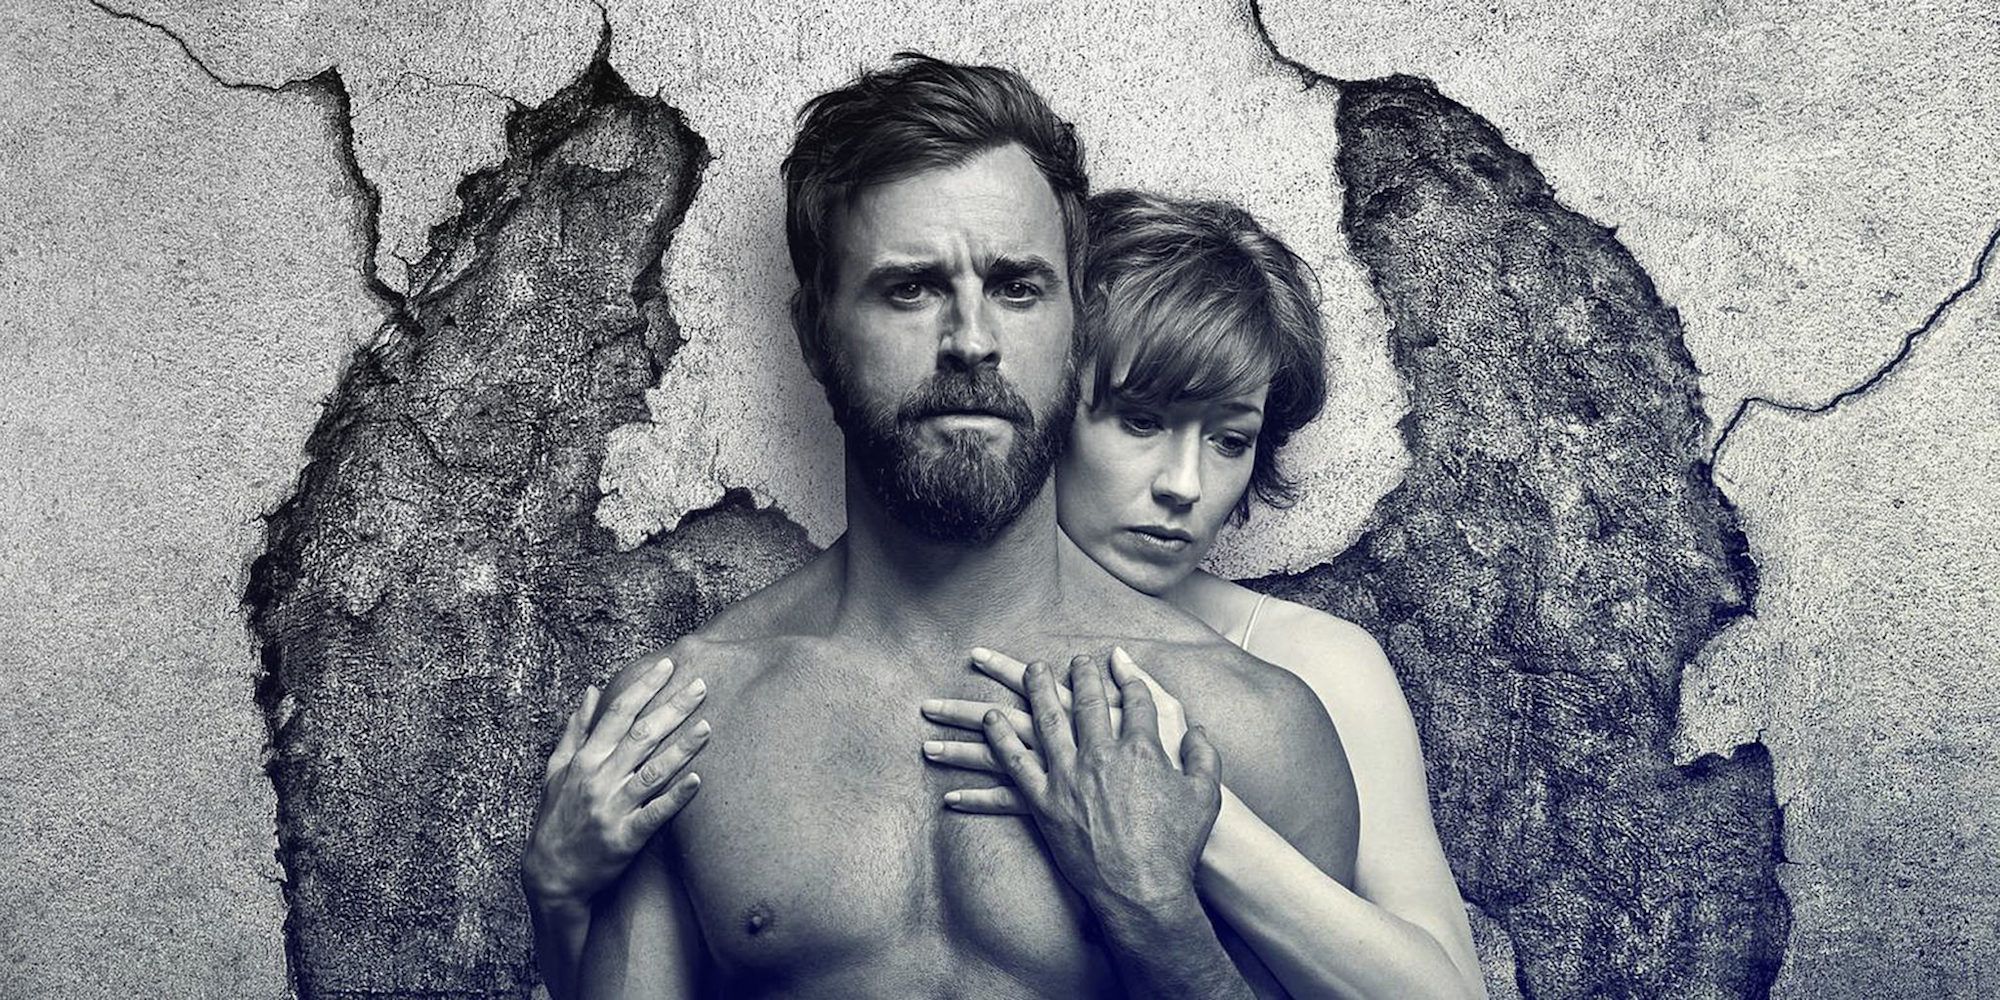 The Leftovers Season 3 Poster